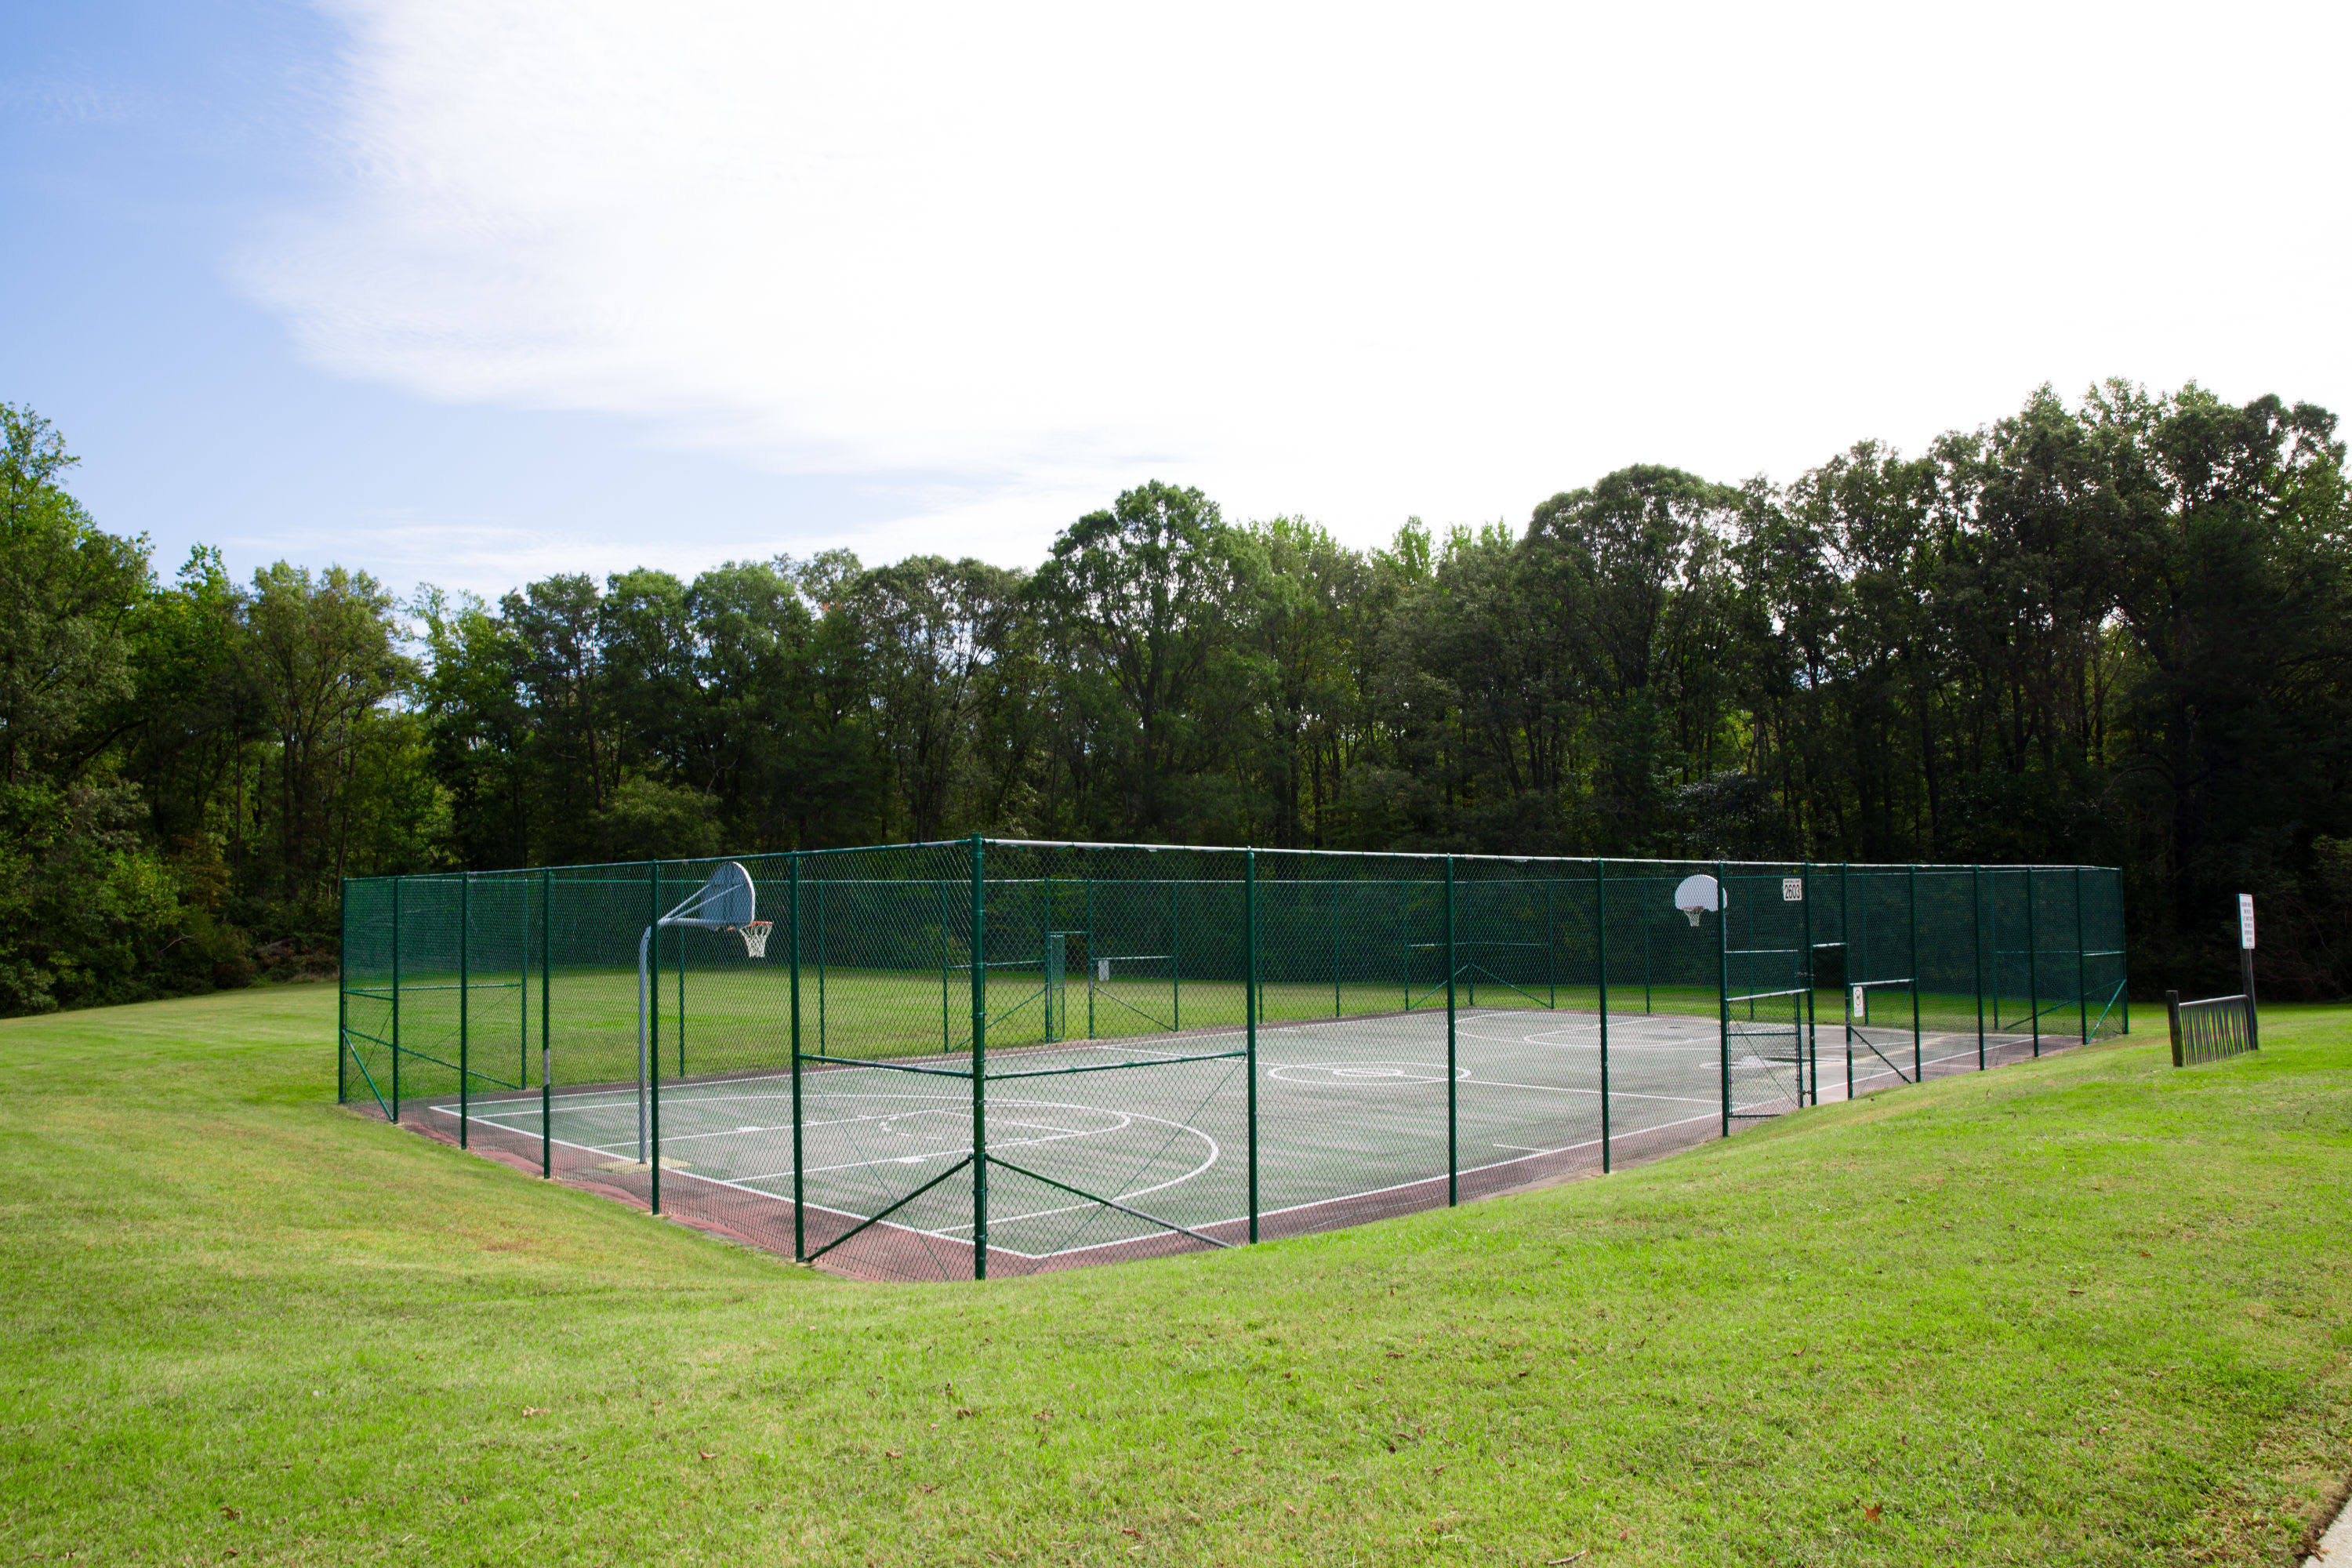 A basketball court at Carpenter Park in Patuxent River, Maryland